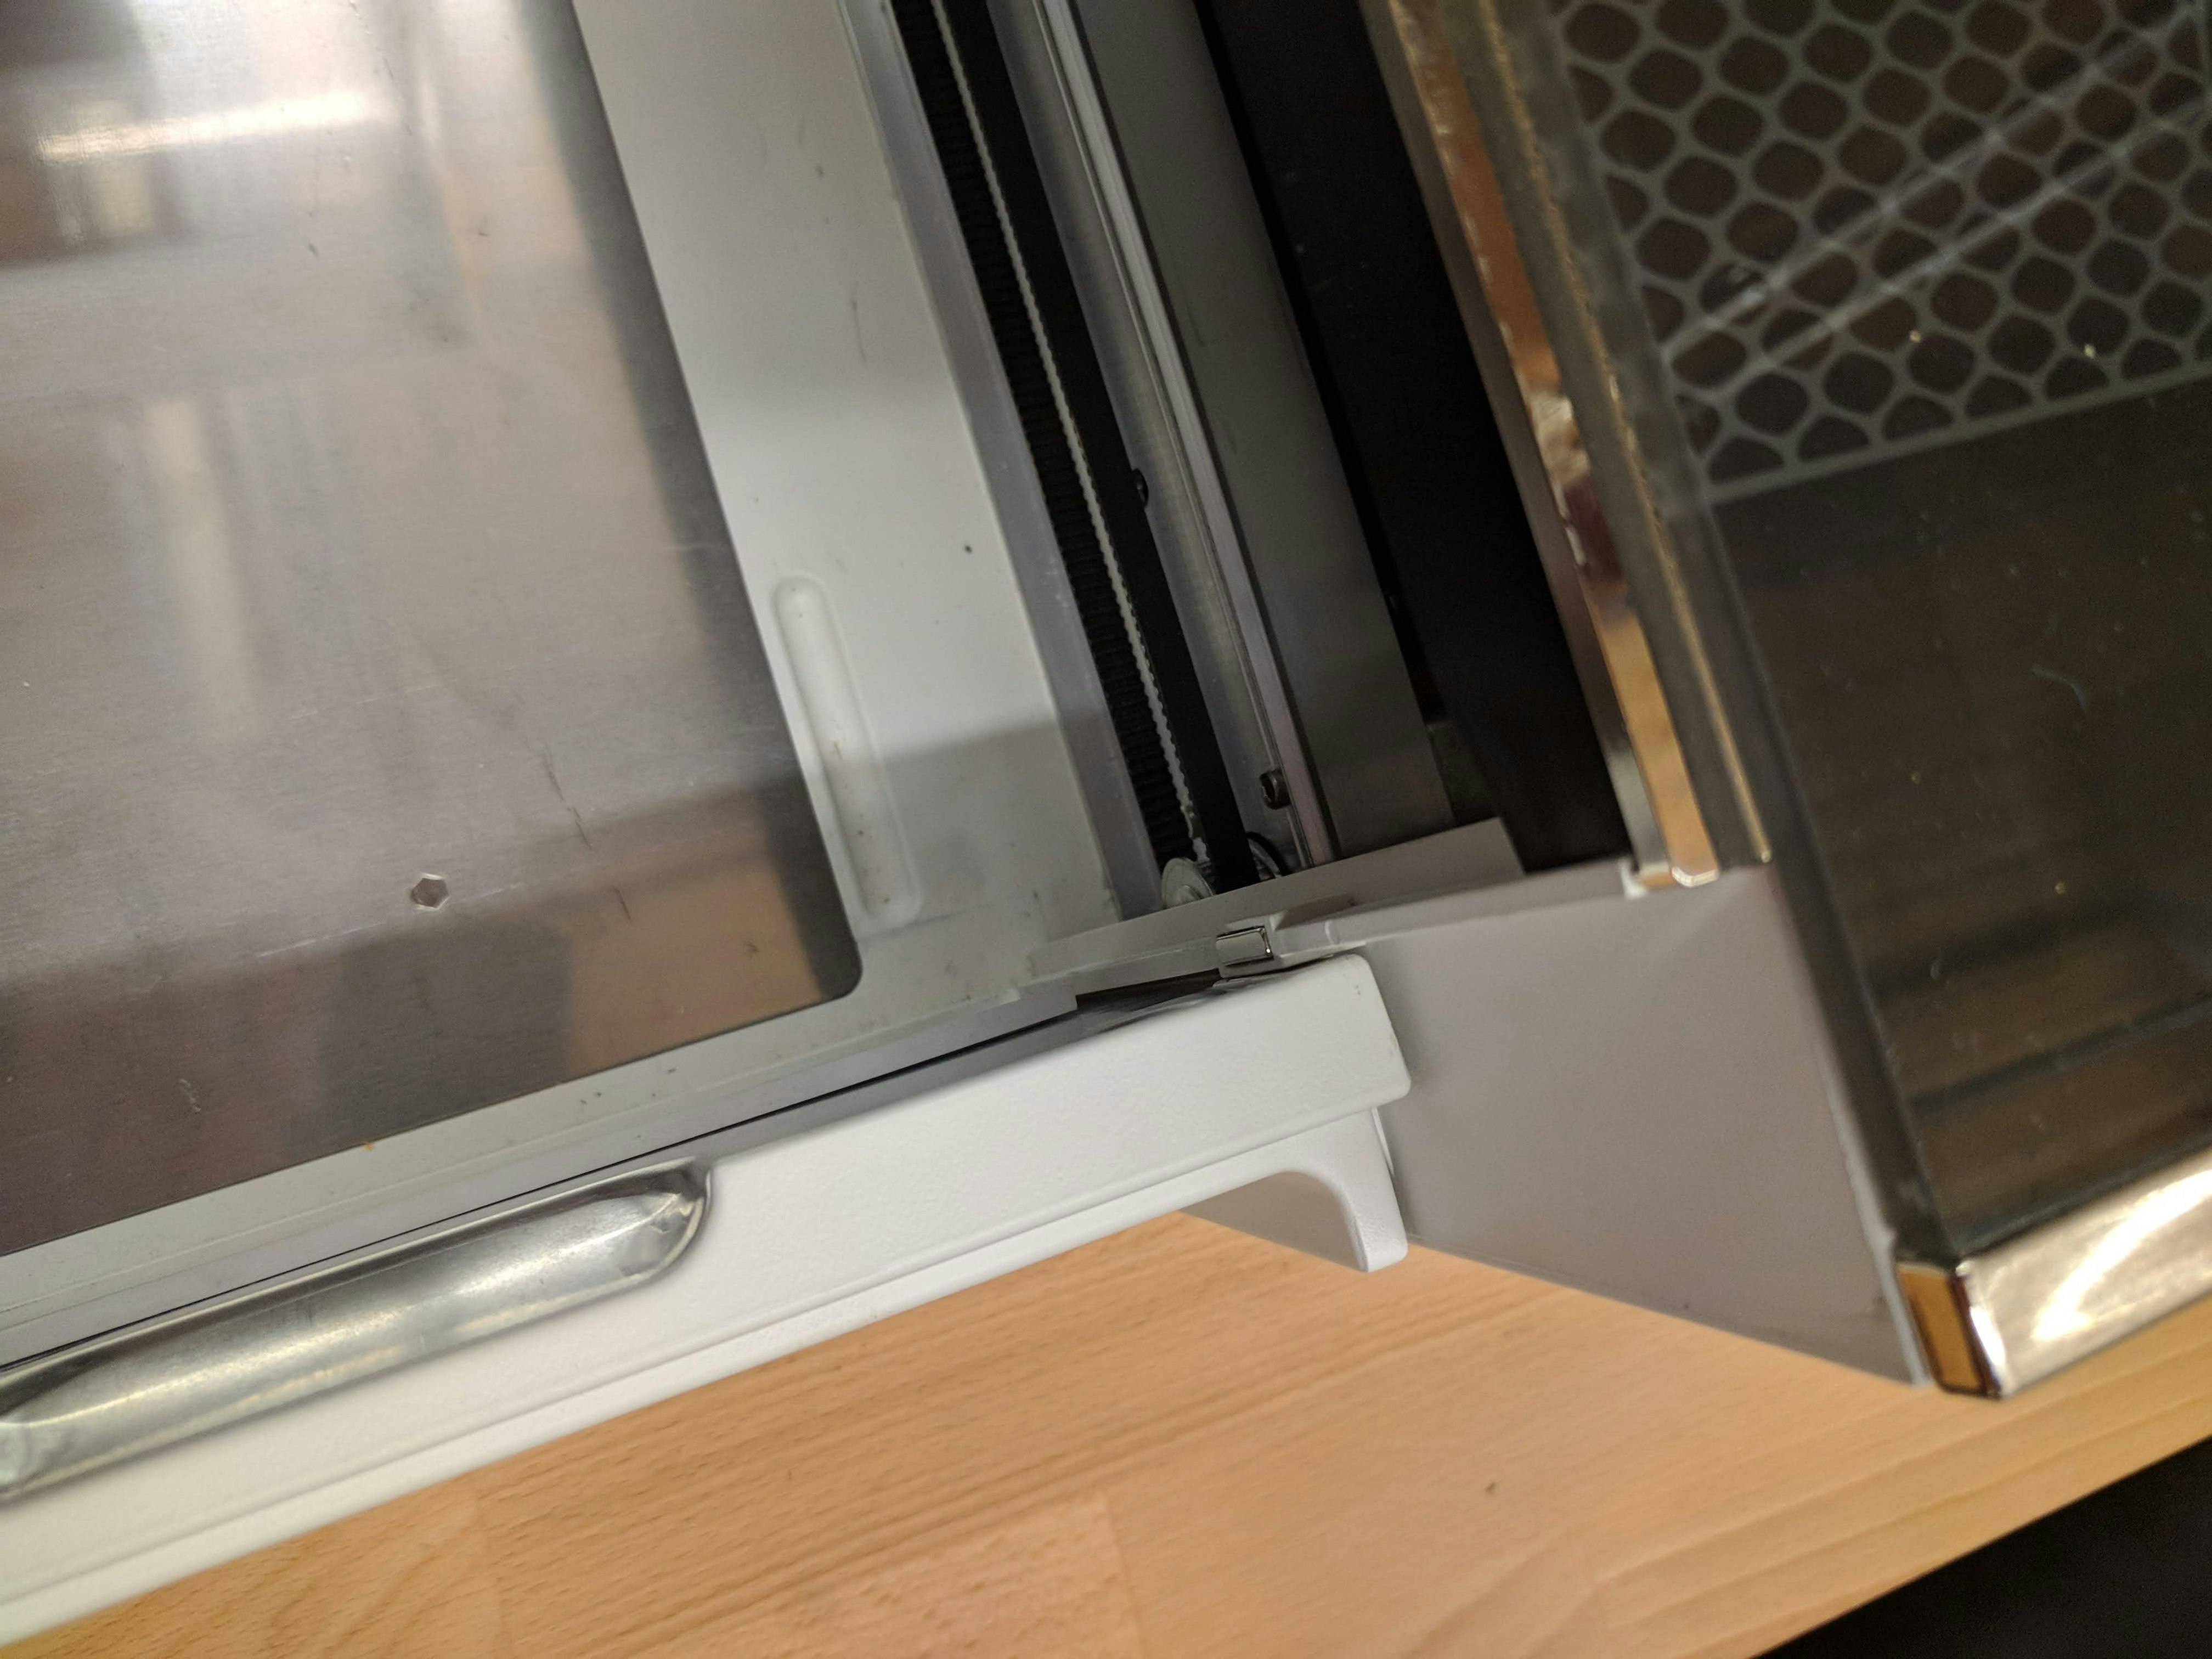 The right side of the closed front door of the Glowforge with the lid open. The door closes completely and there is no damage.